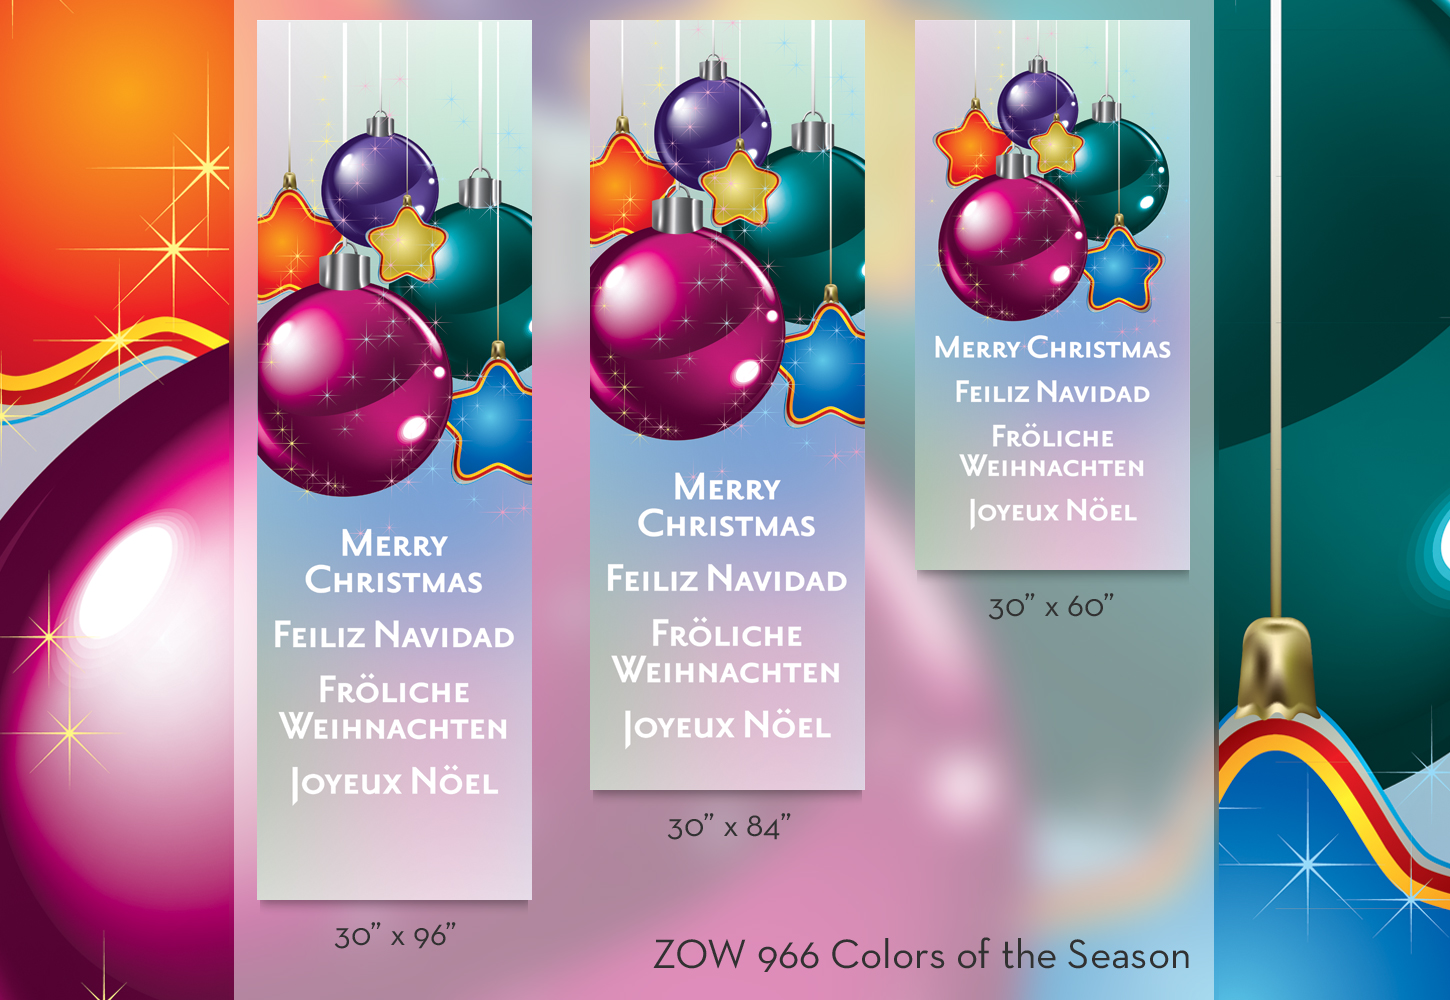 ZOW 966 Colors of the Season